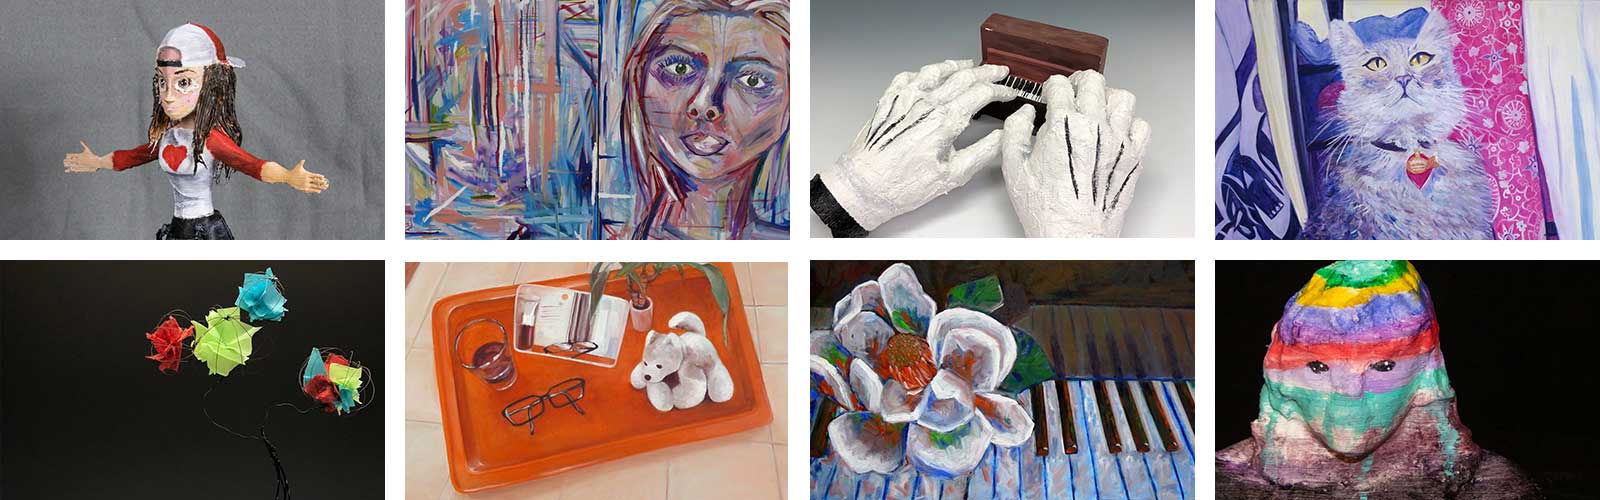 A variety of images of students' artwork